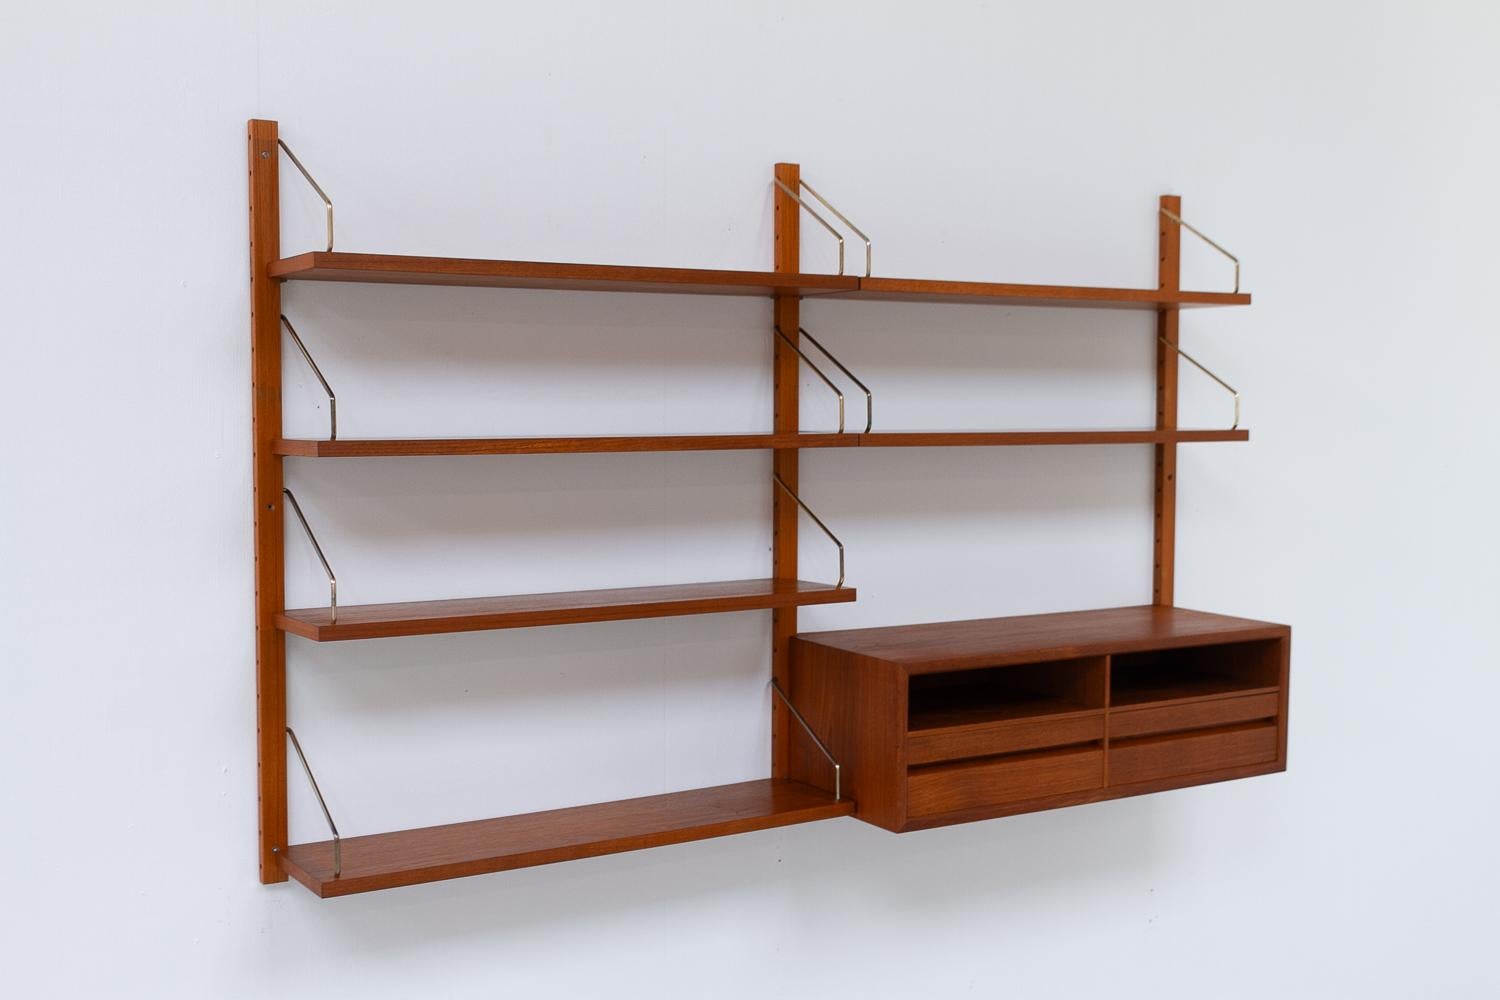 Danish Modern 2-Bay Modular Teak Wall Unit by Poul Cadovius for Cado, 1960s.

Mid-Century Modern 2 bay shelving system model Royal. This is an original vintage floating bookcase designed in 1948 by Danish architect Poul Cadovius. 
Cadovius had the